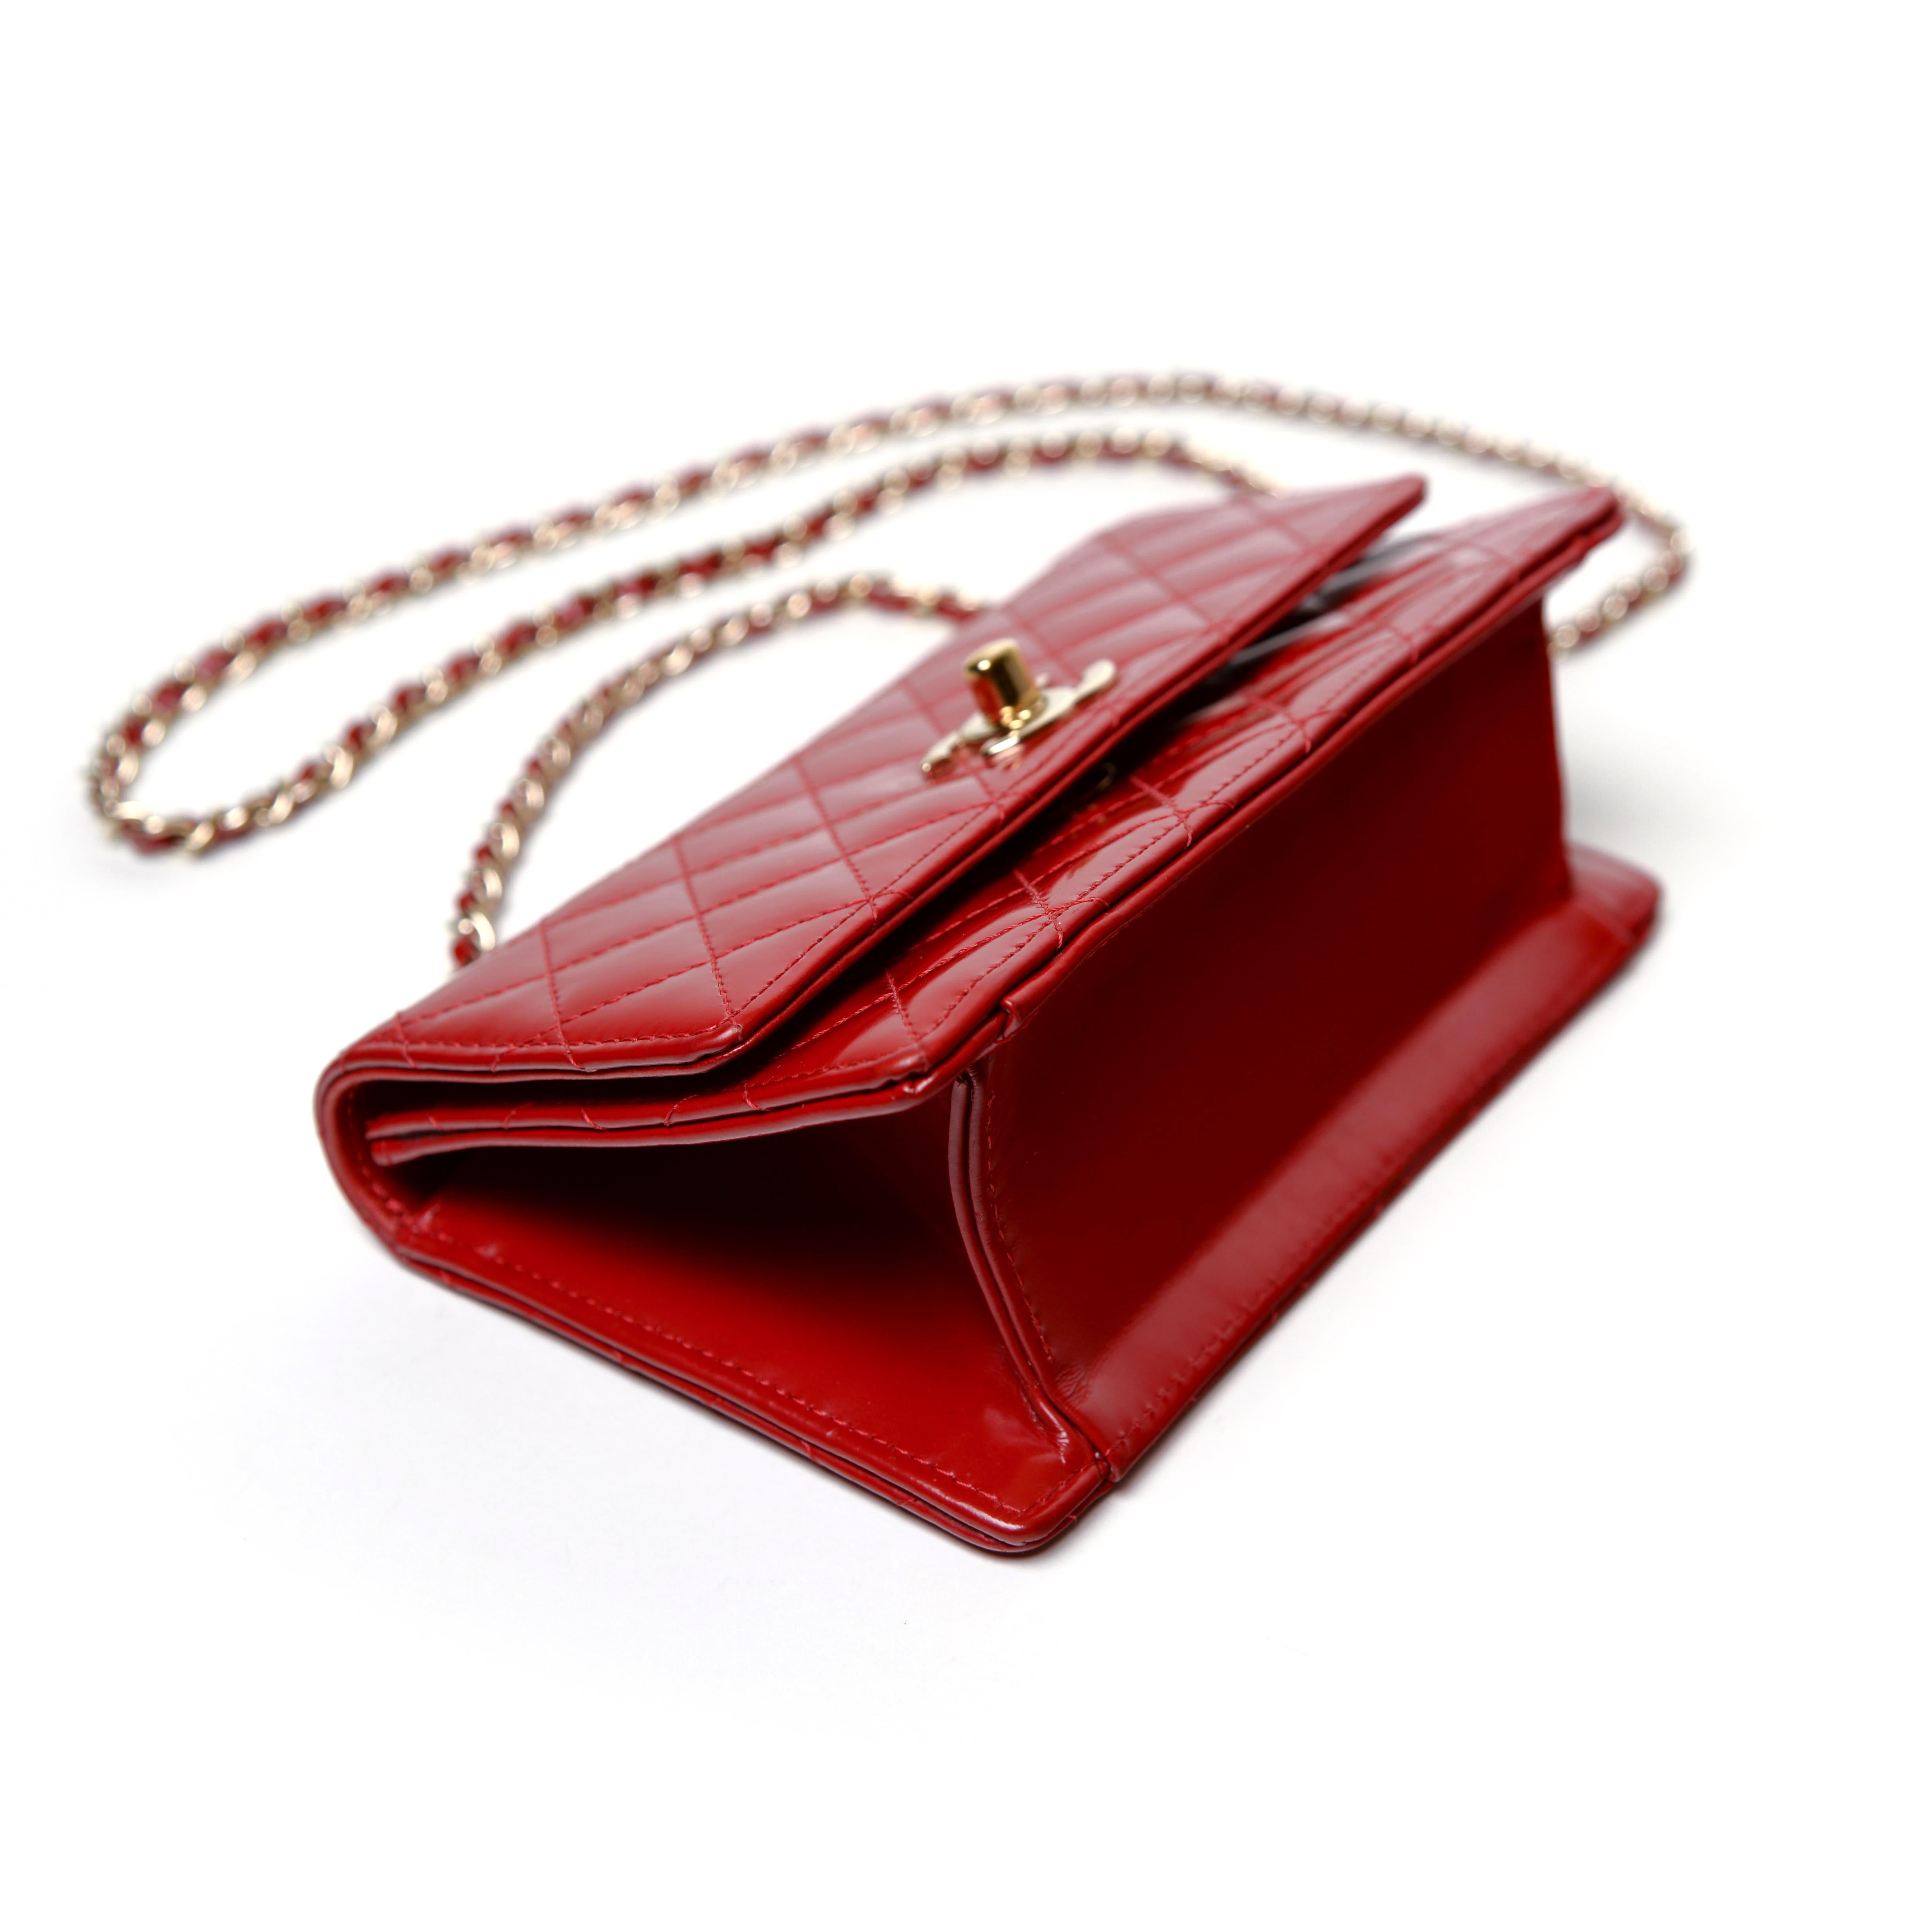 Chanel Classic Red Mini Flap Bag Patent Leather 3